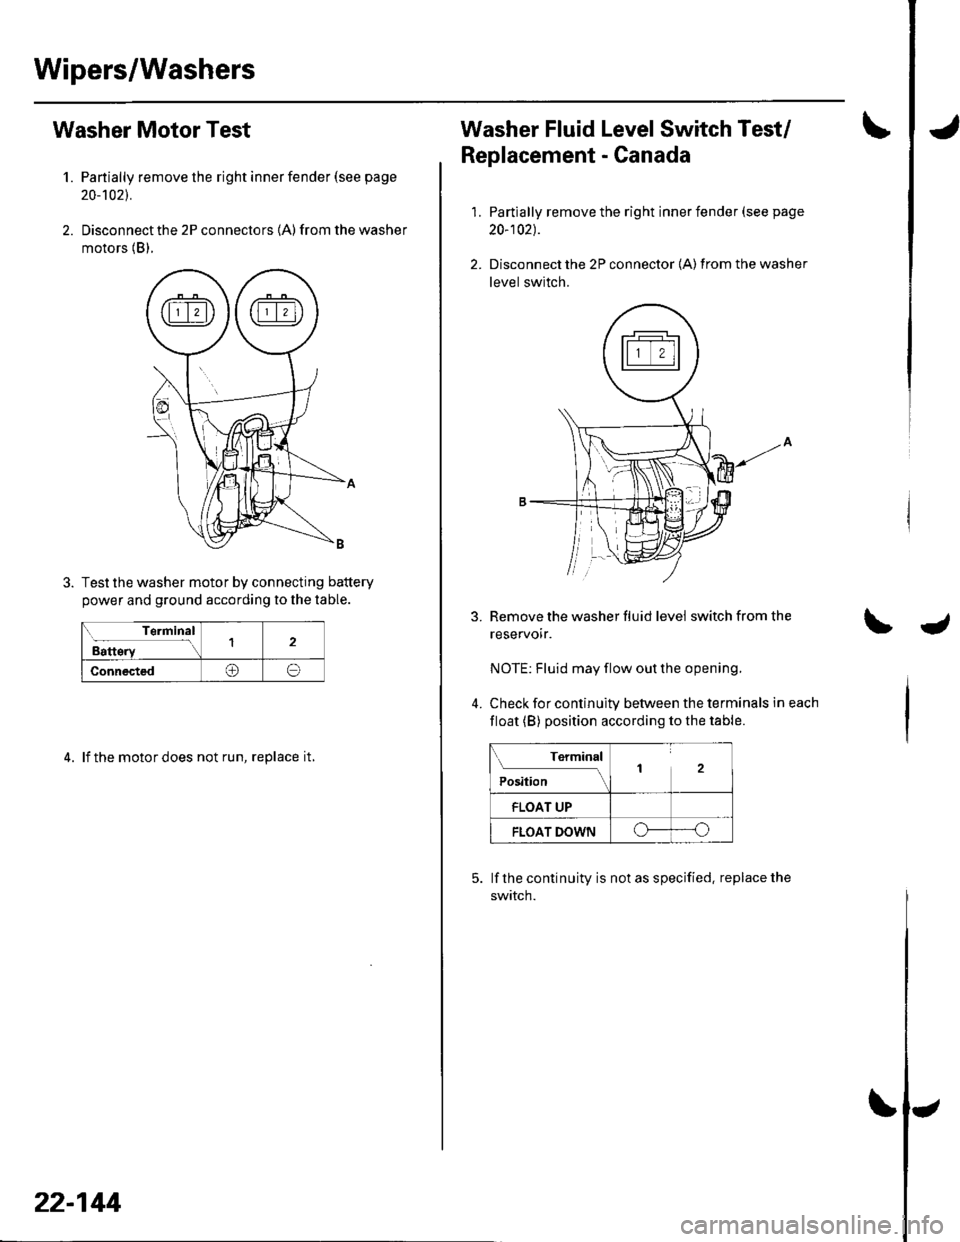 HONDA CIVIC 2003 7.G Workshop Manual Wipers/Washers
Washer Motor Test
1. Partially remove the right inner fender (see page
20-t021.
2. Disconnect the 2P connectors (A) from the washer
motors (B).
Test the washer motor by connecting batt